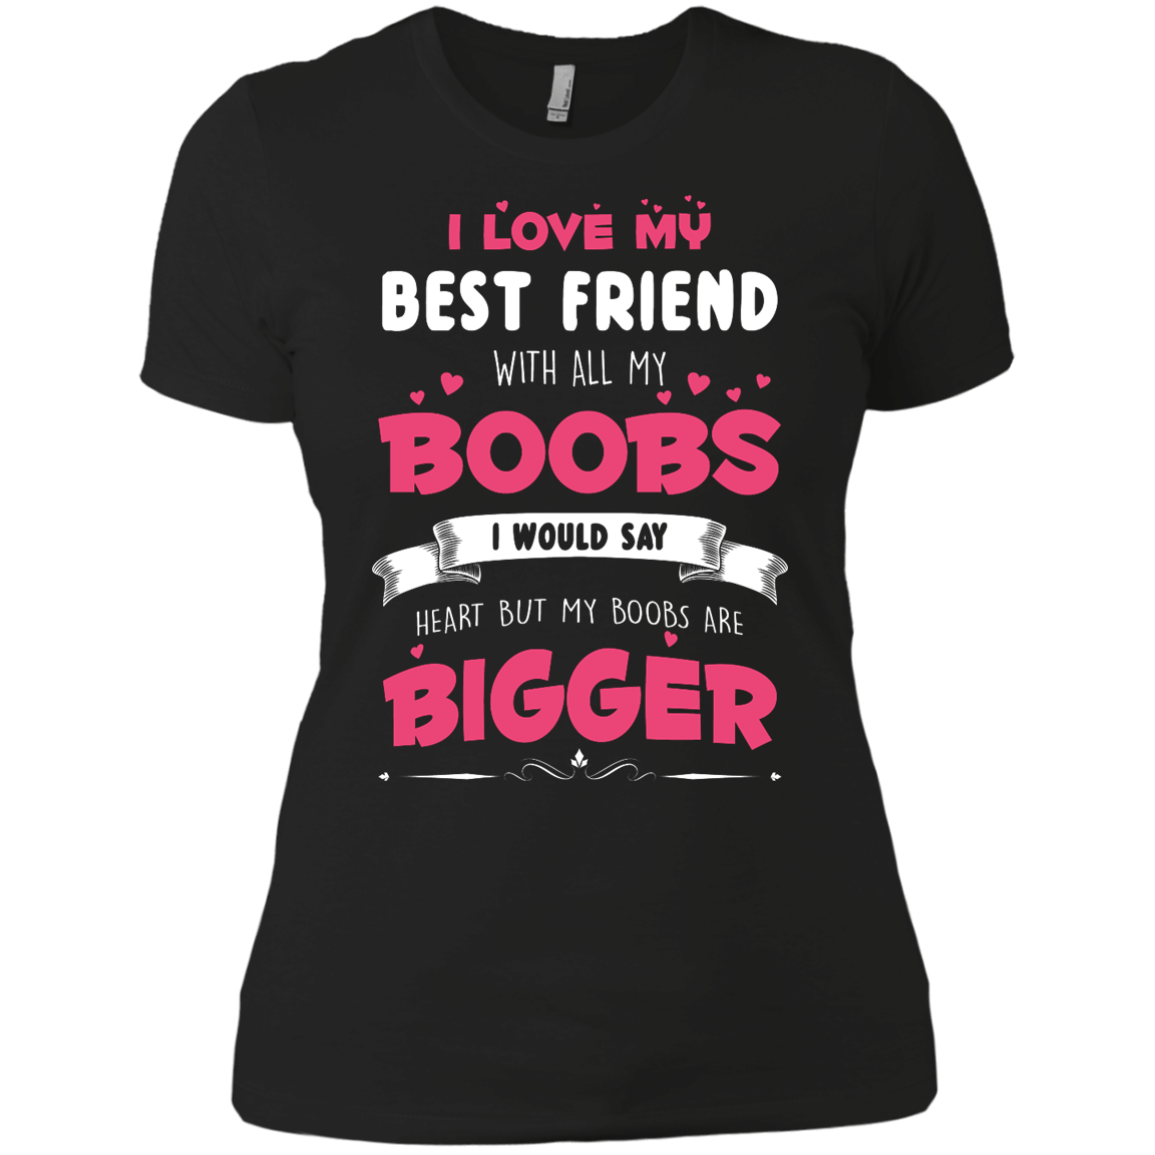 Best Friends Forever Shirts I Love My Best Friend With All Boobs T Shirtstankhoodie